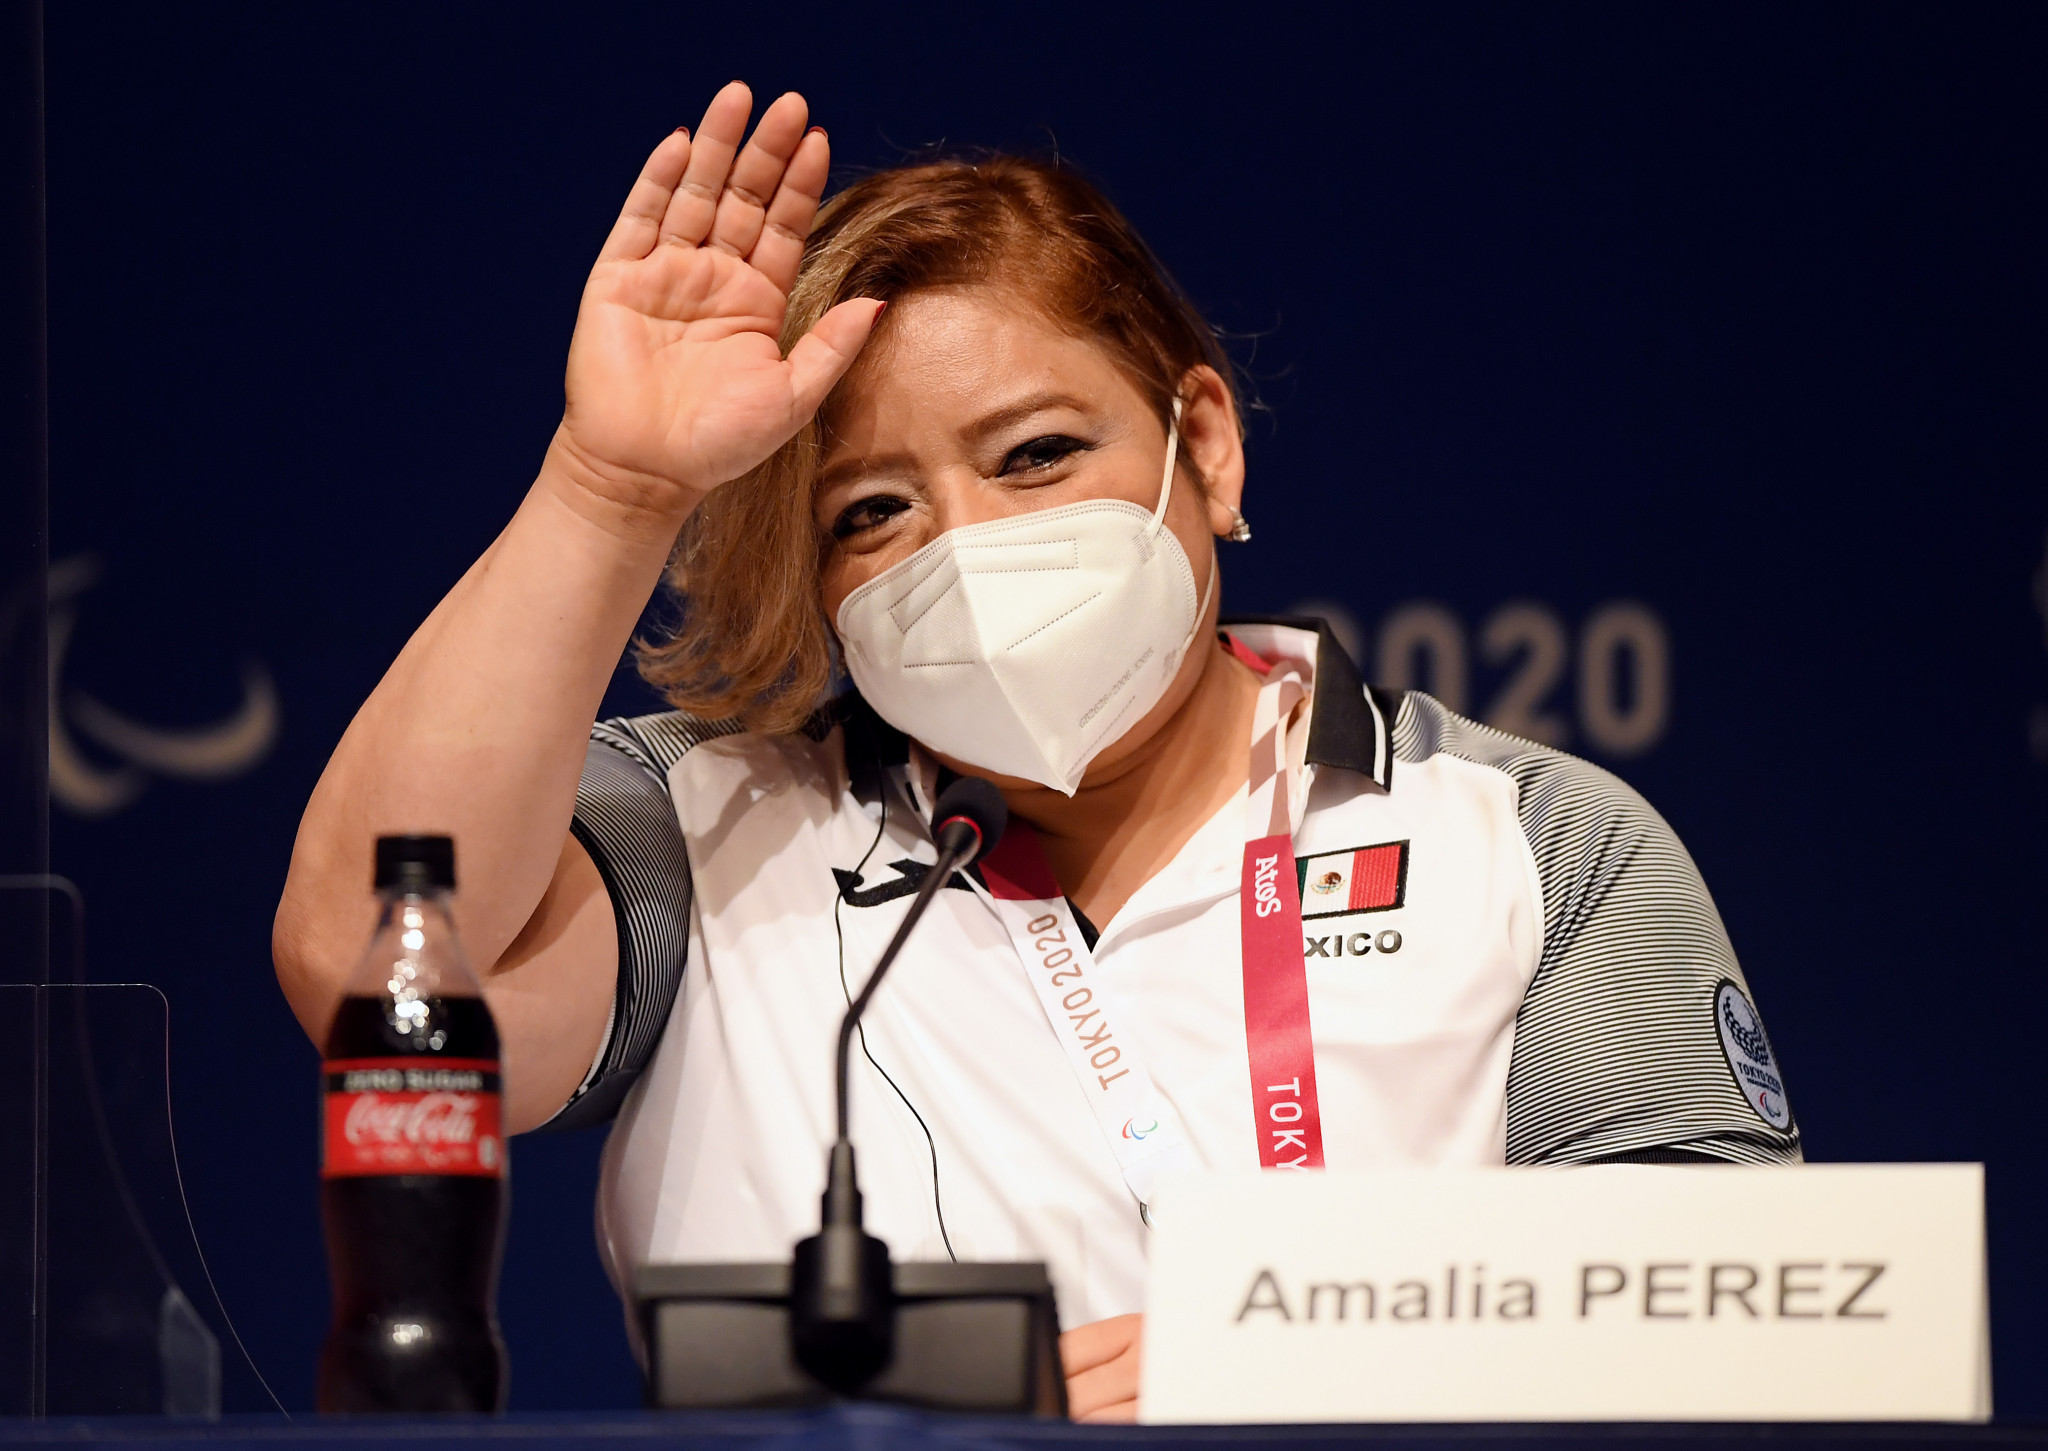 Mexico's Amalia Pérez is aiming for gold in the women's under-61kg ©Getty Images